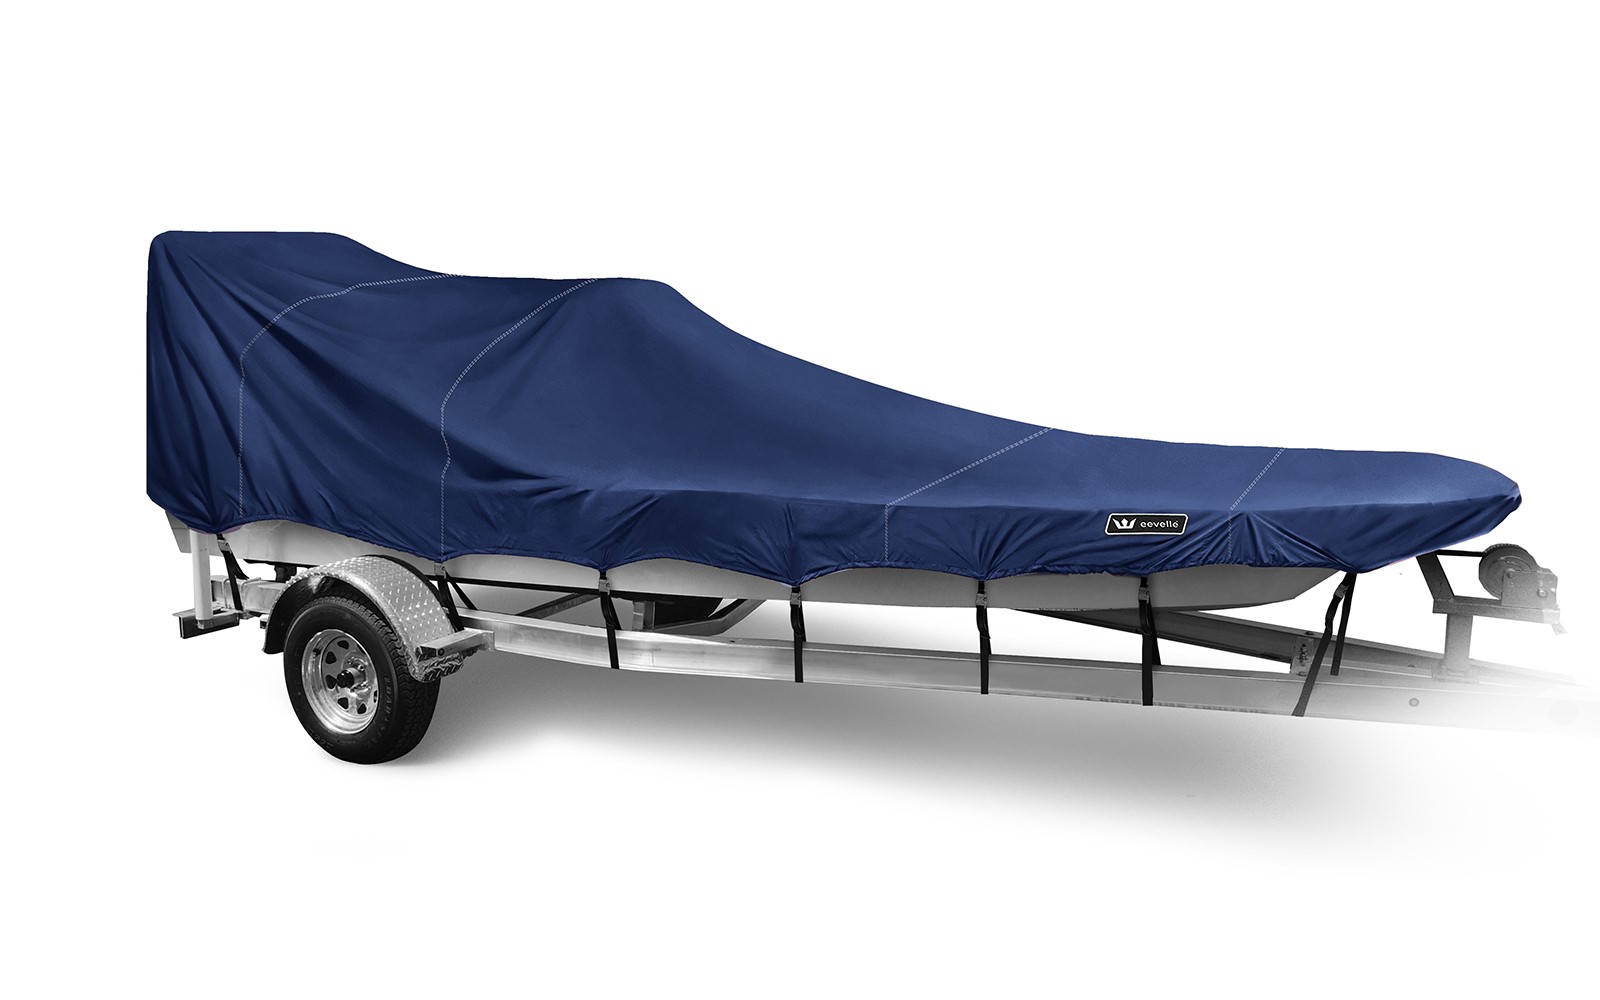 Boat Covers for V HULL FISHING - Center Console, Poling Platform